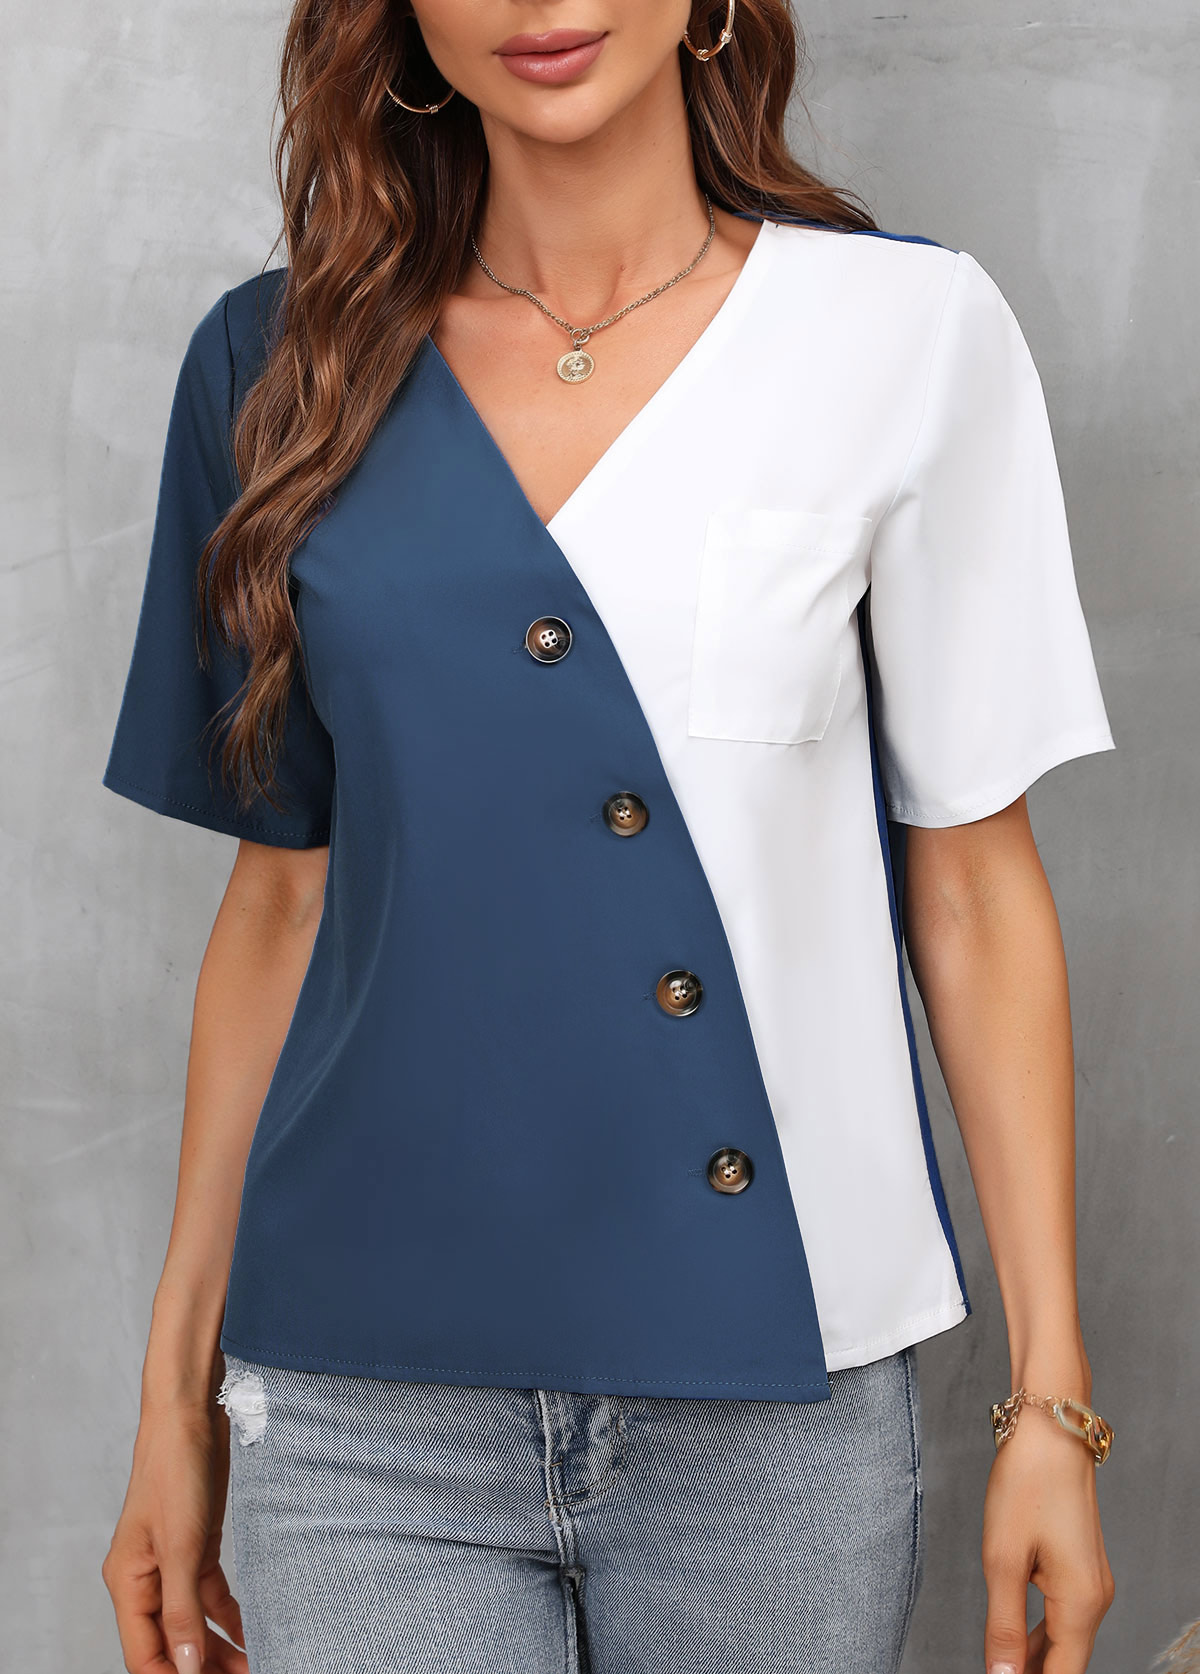 Inclined Button Contrast V Neck Blue Blouse